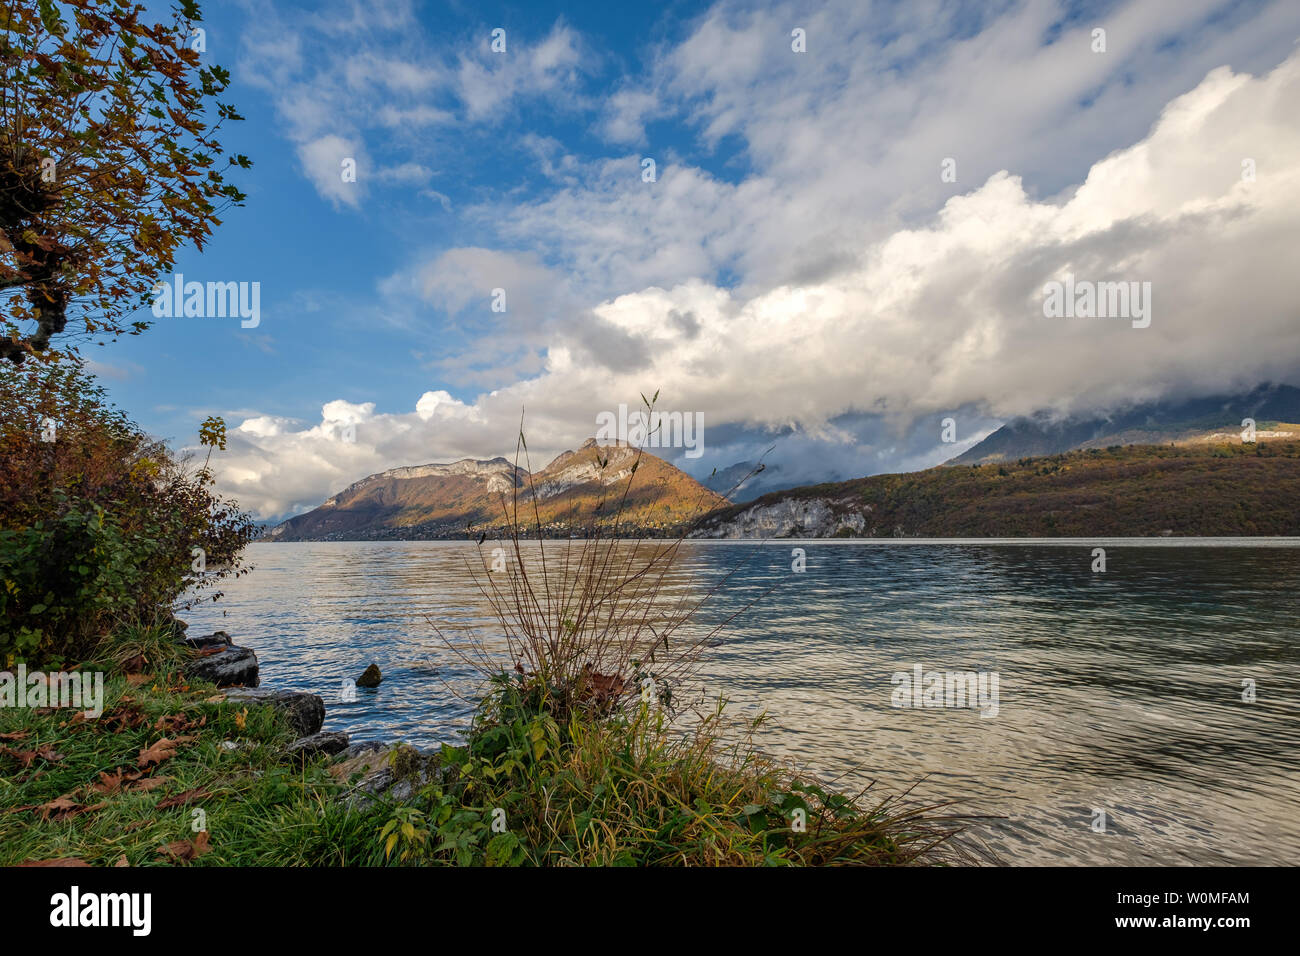 A beautiful fall view from a low angle on Lake Annecy, France, with mountains with low clouds in the background Stock Photo